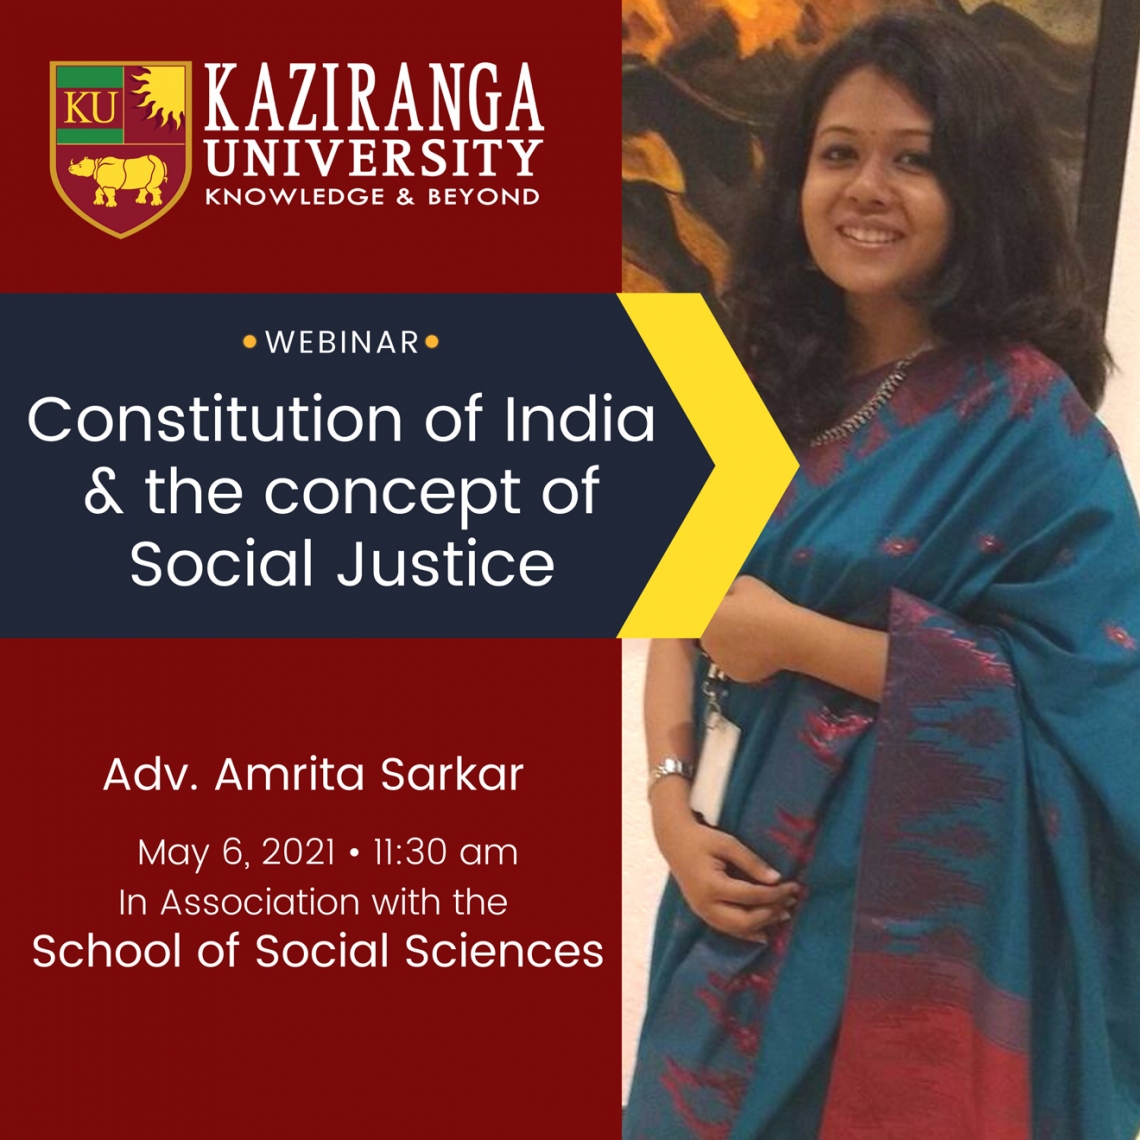 Webinar on 'Constitution of India and the concept of Social Justice' organized by the School of Social Sciences.